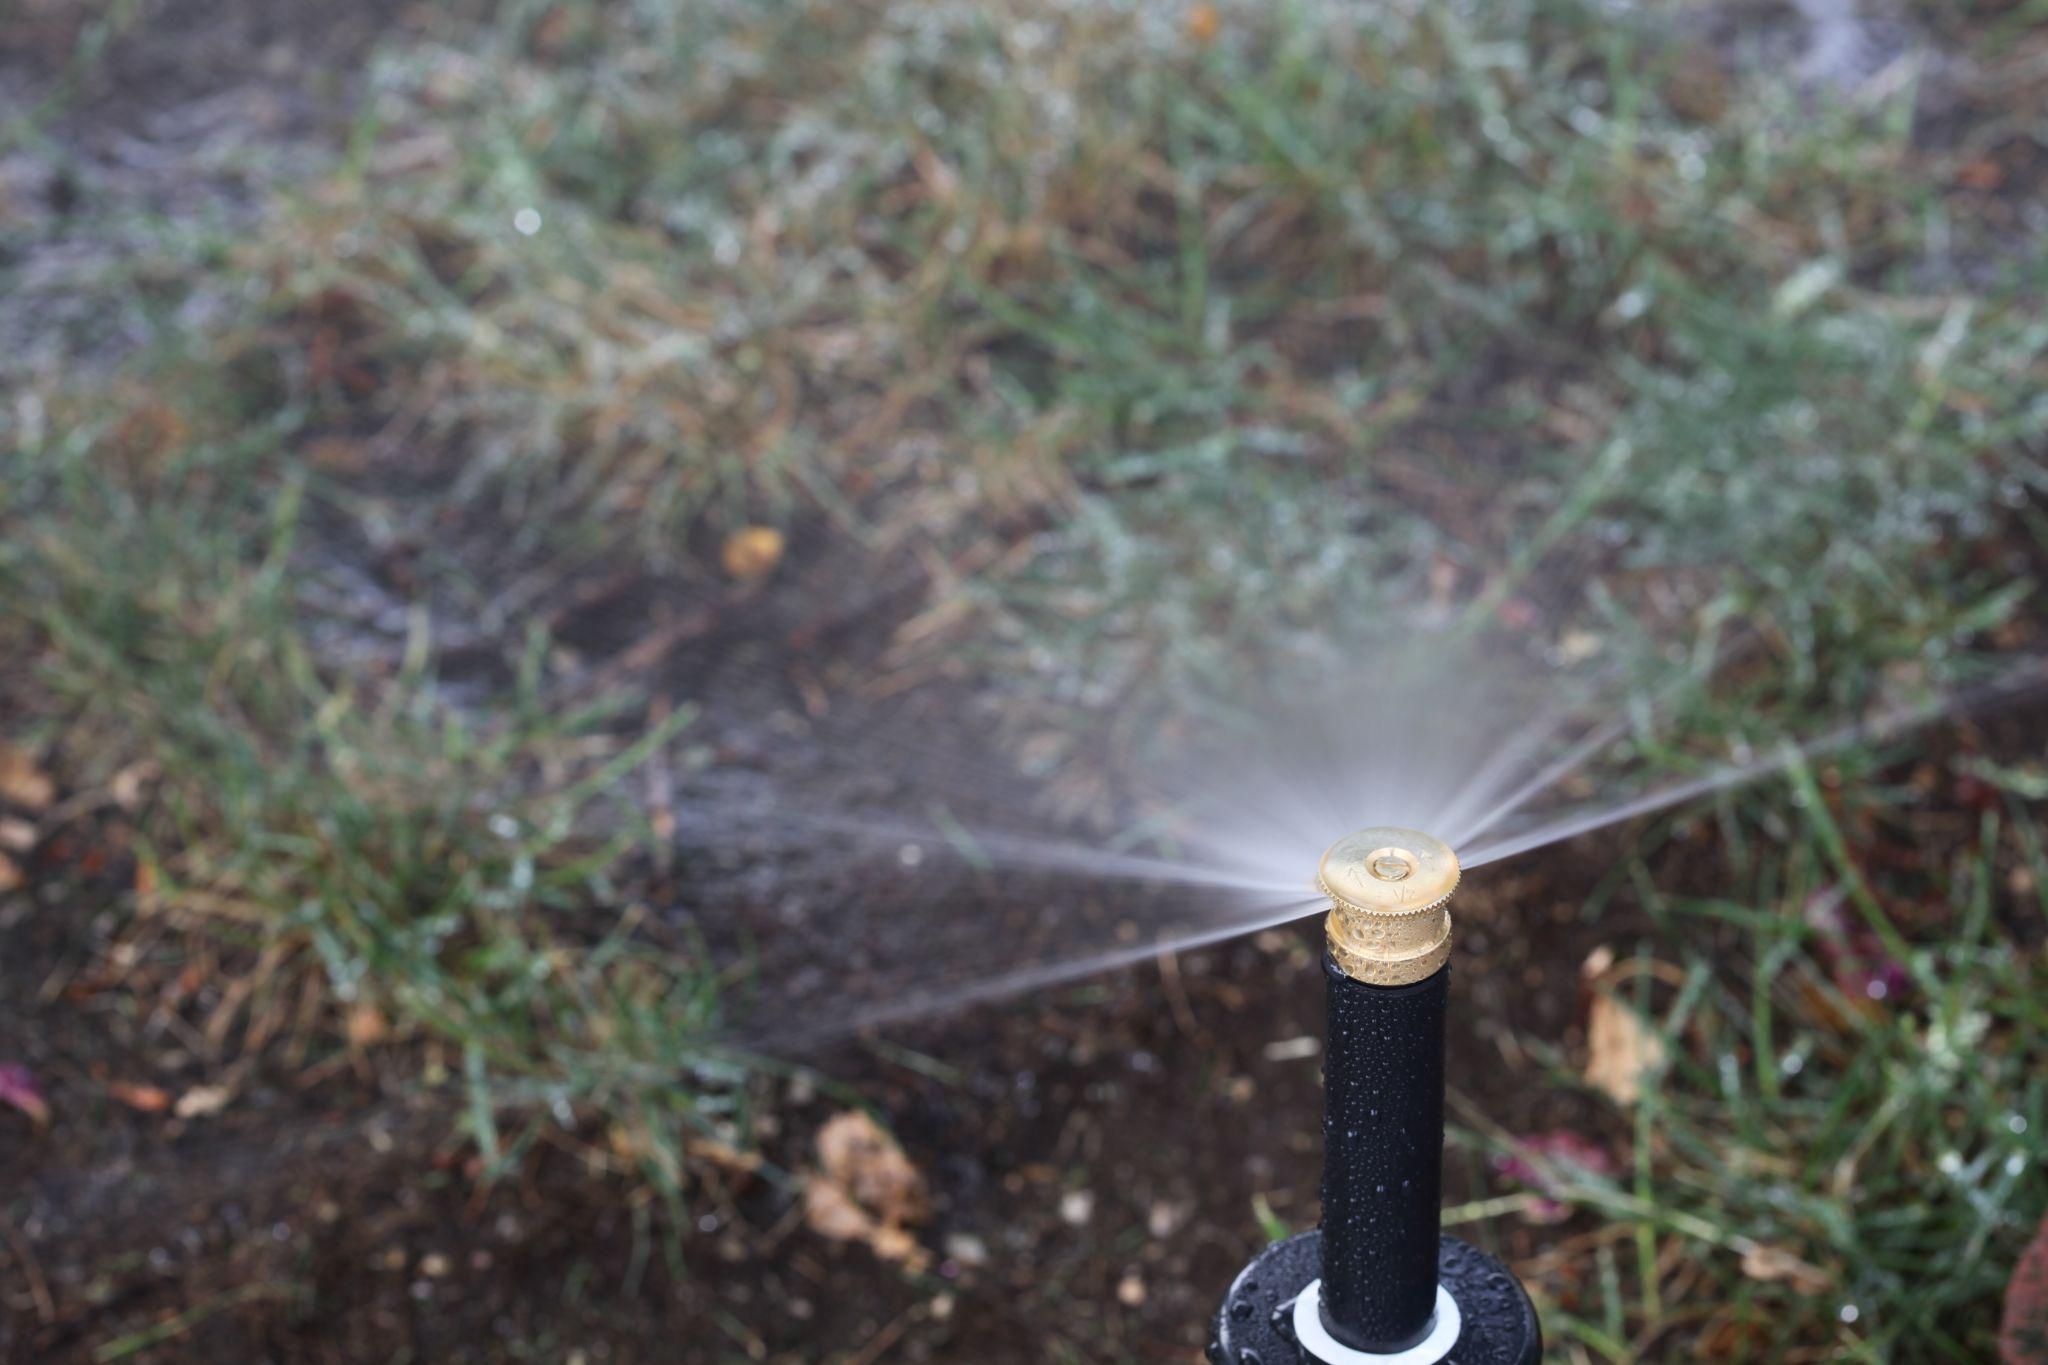 The 7 Best Sprinkler Heads: Top-Rated & Buying Guide 2021